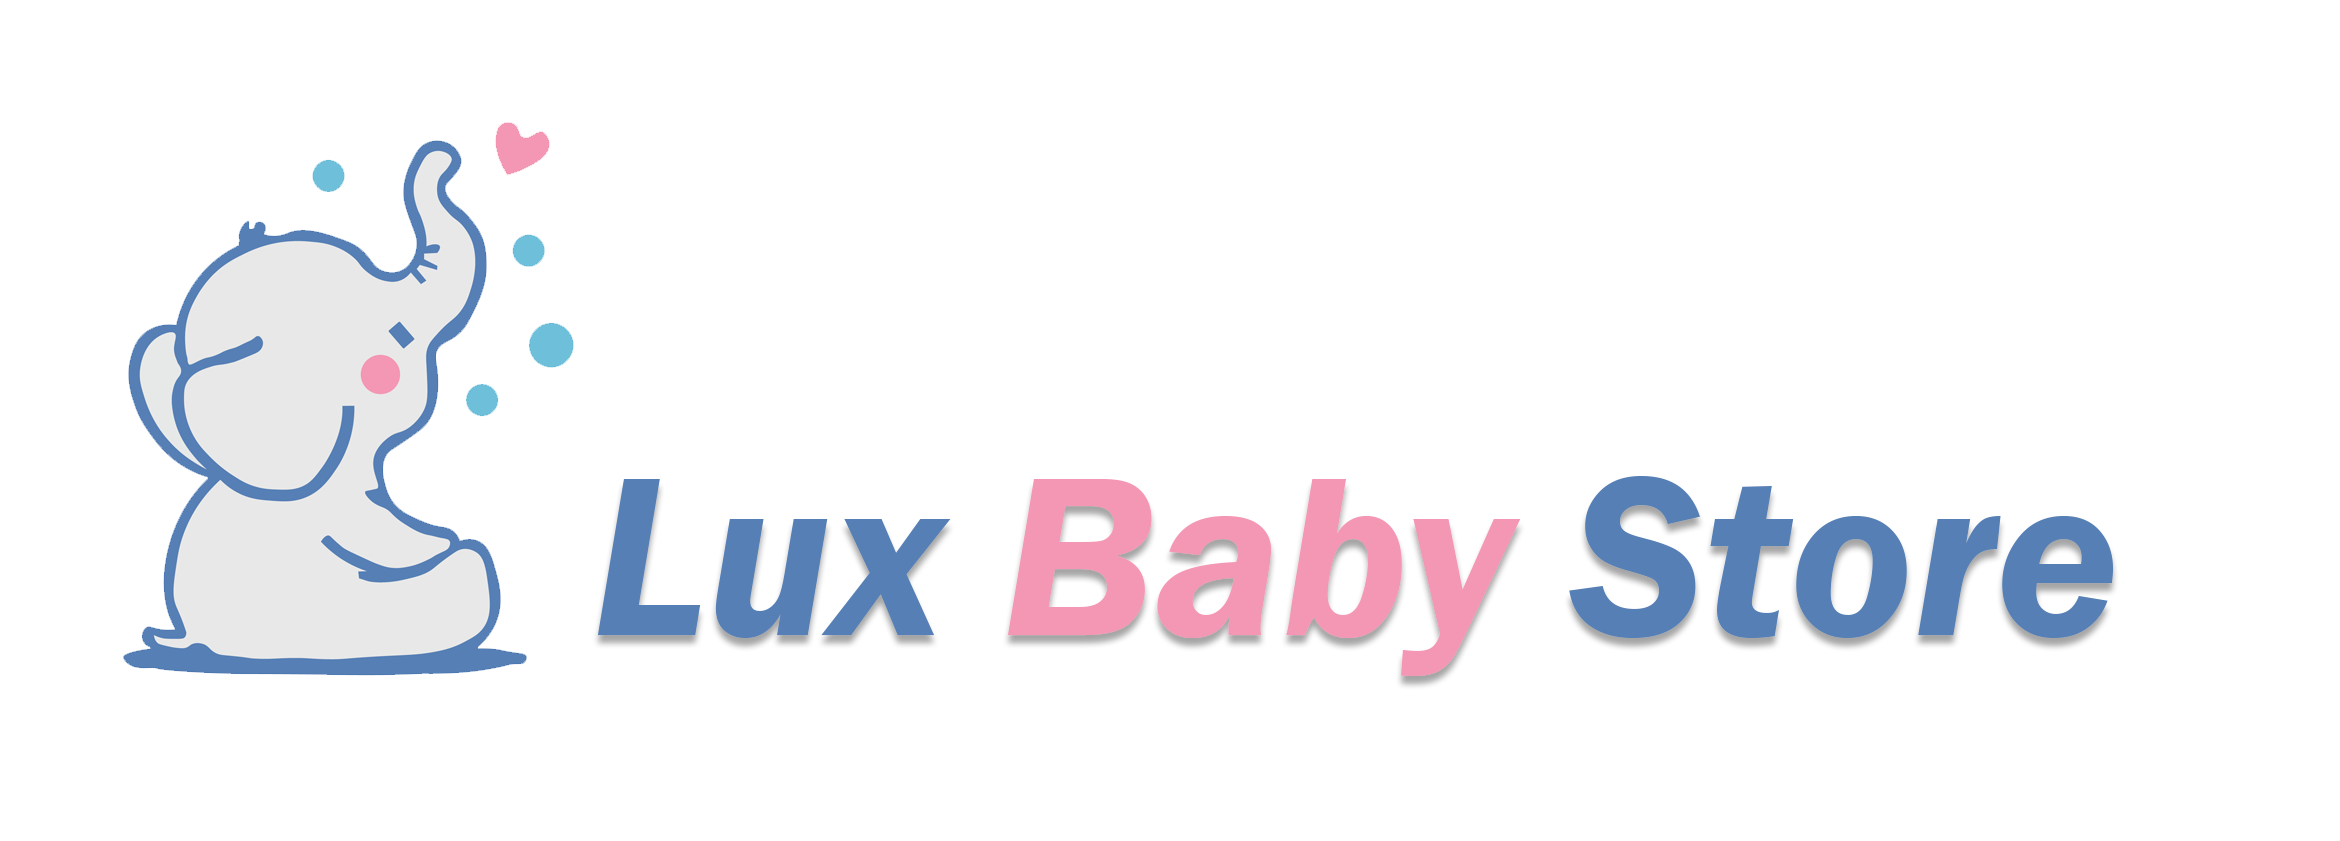 lux_baby_store_logo